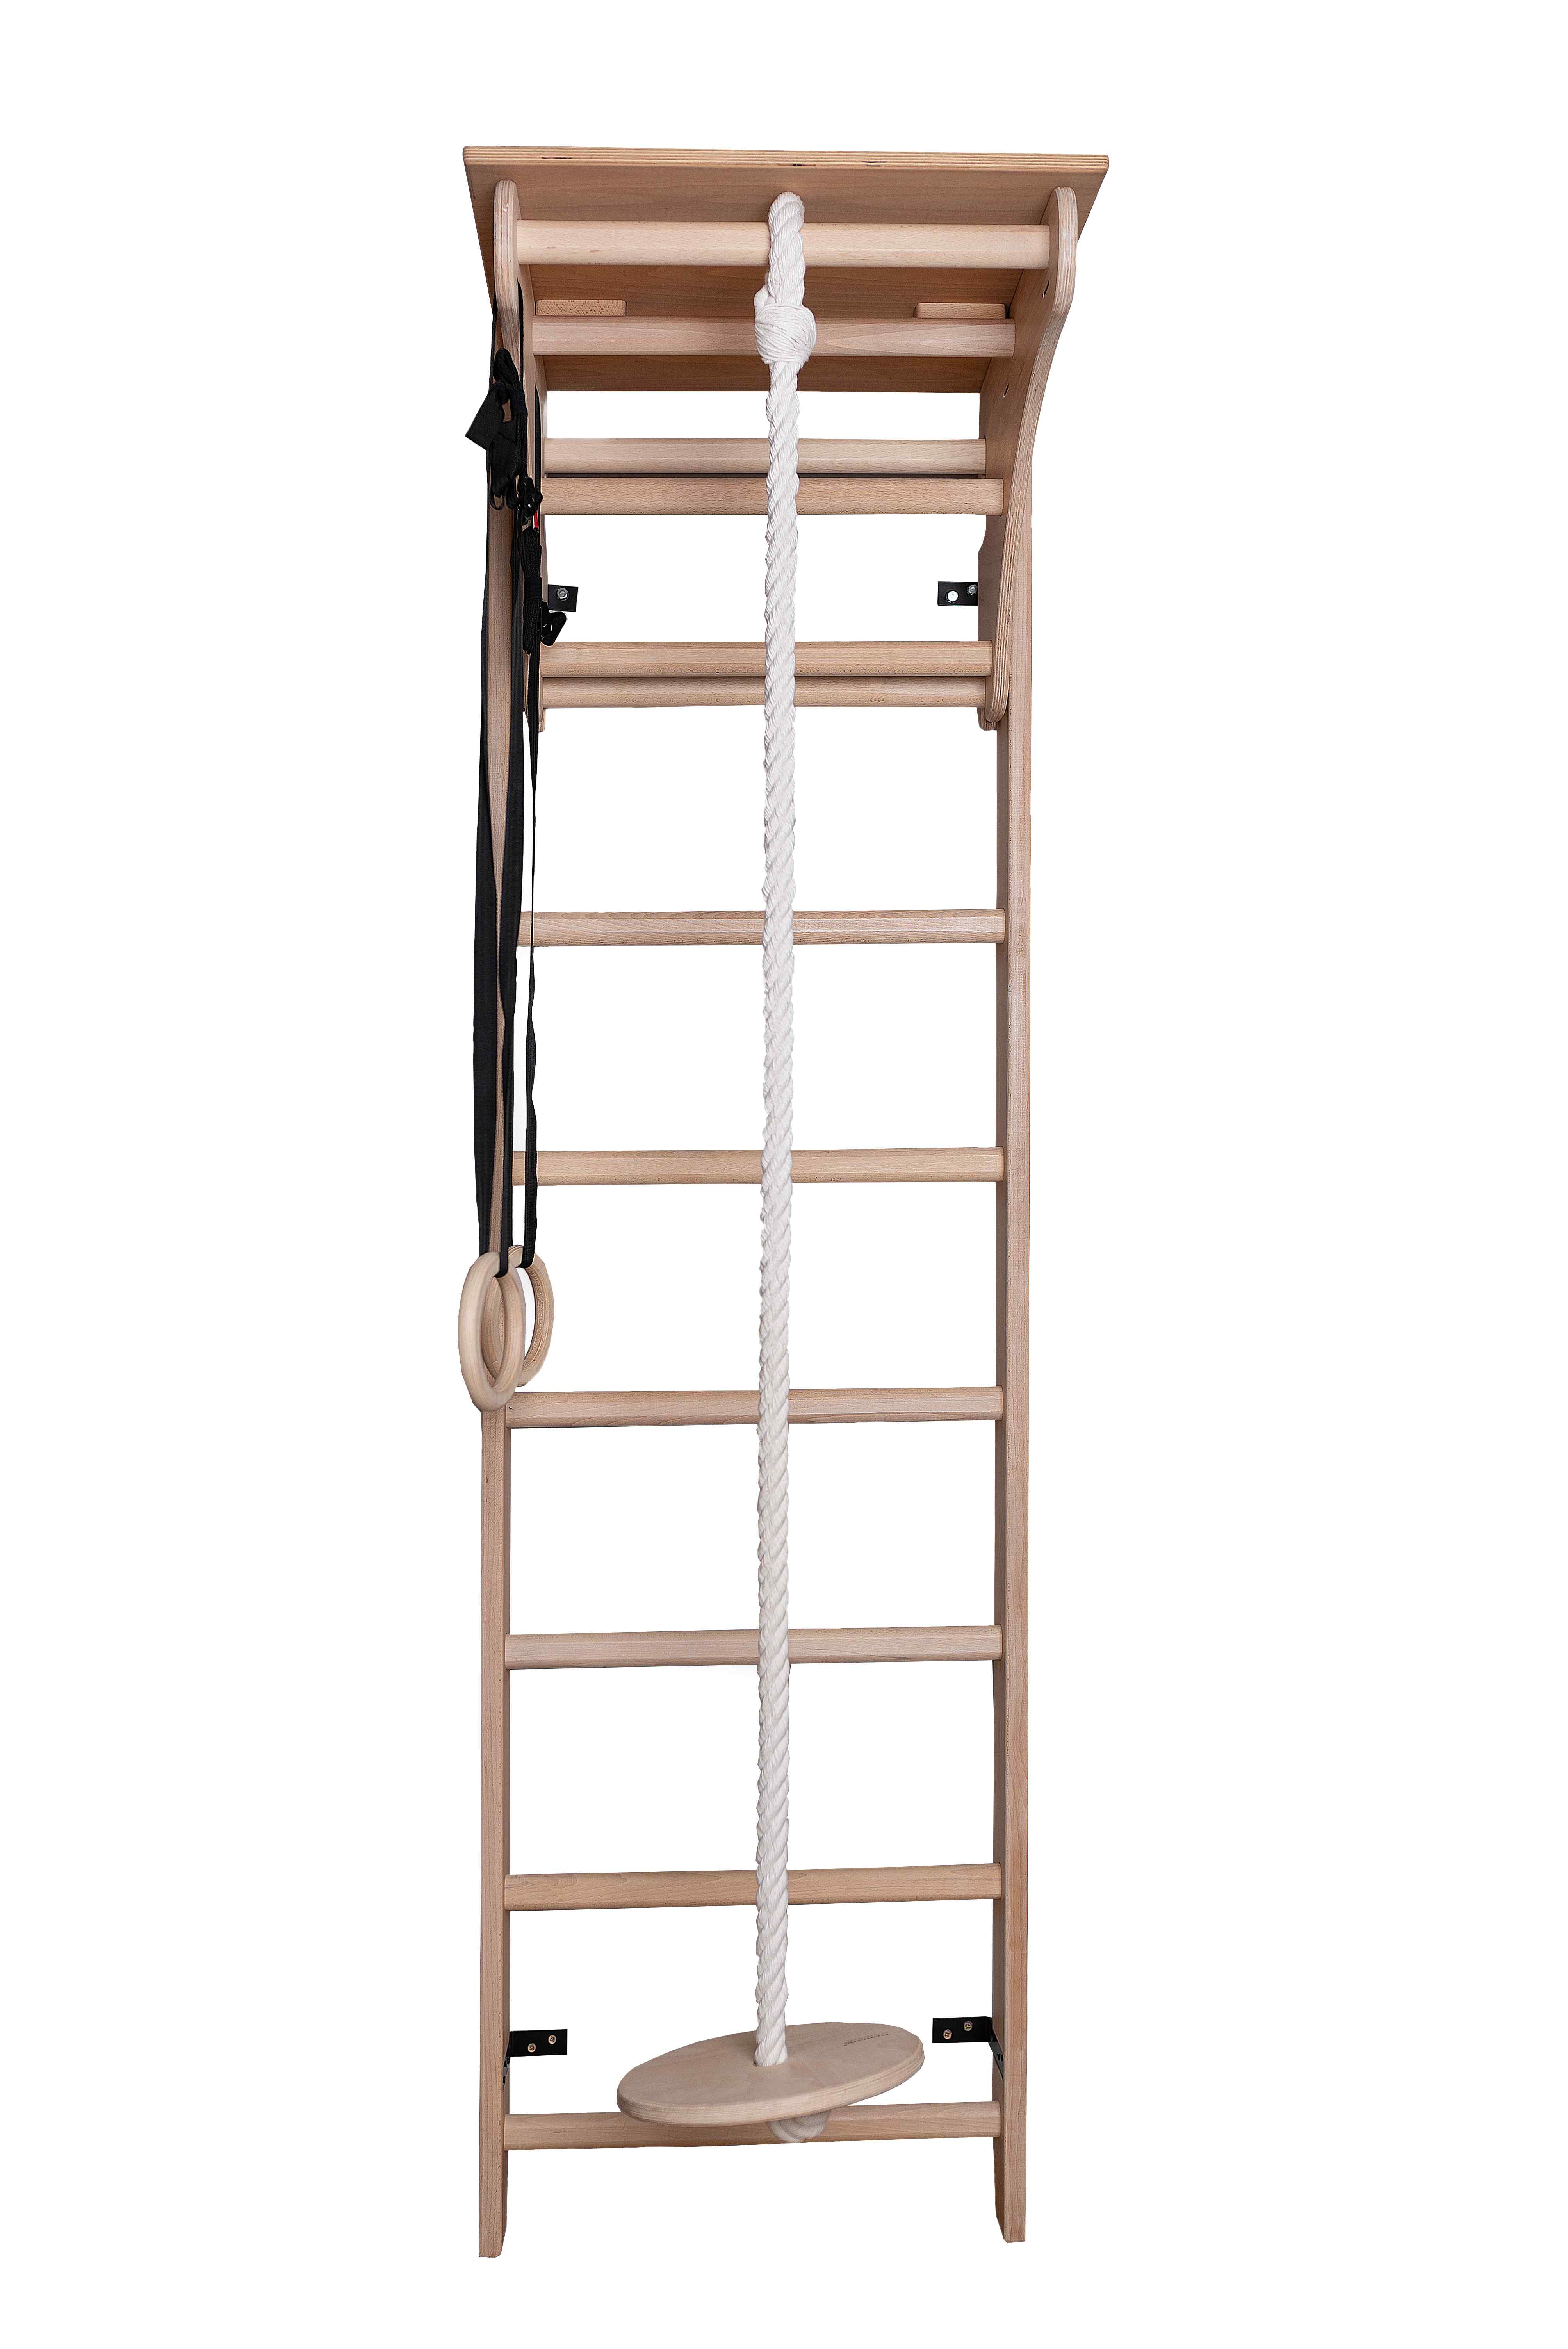 BenchK 112 Wooden Wall Bars with Desk & Gymnastics Accessories Swedish Ladder Home Gym Equipment